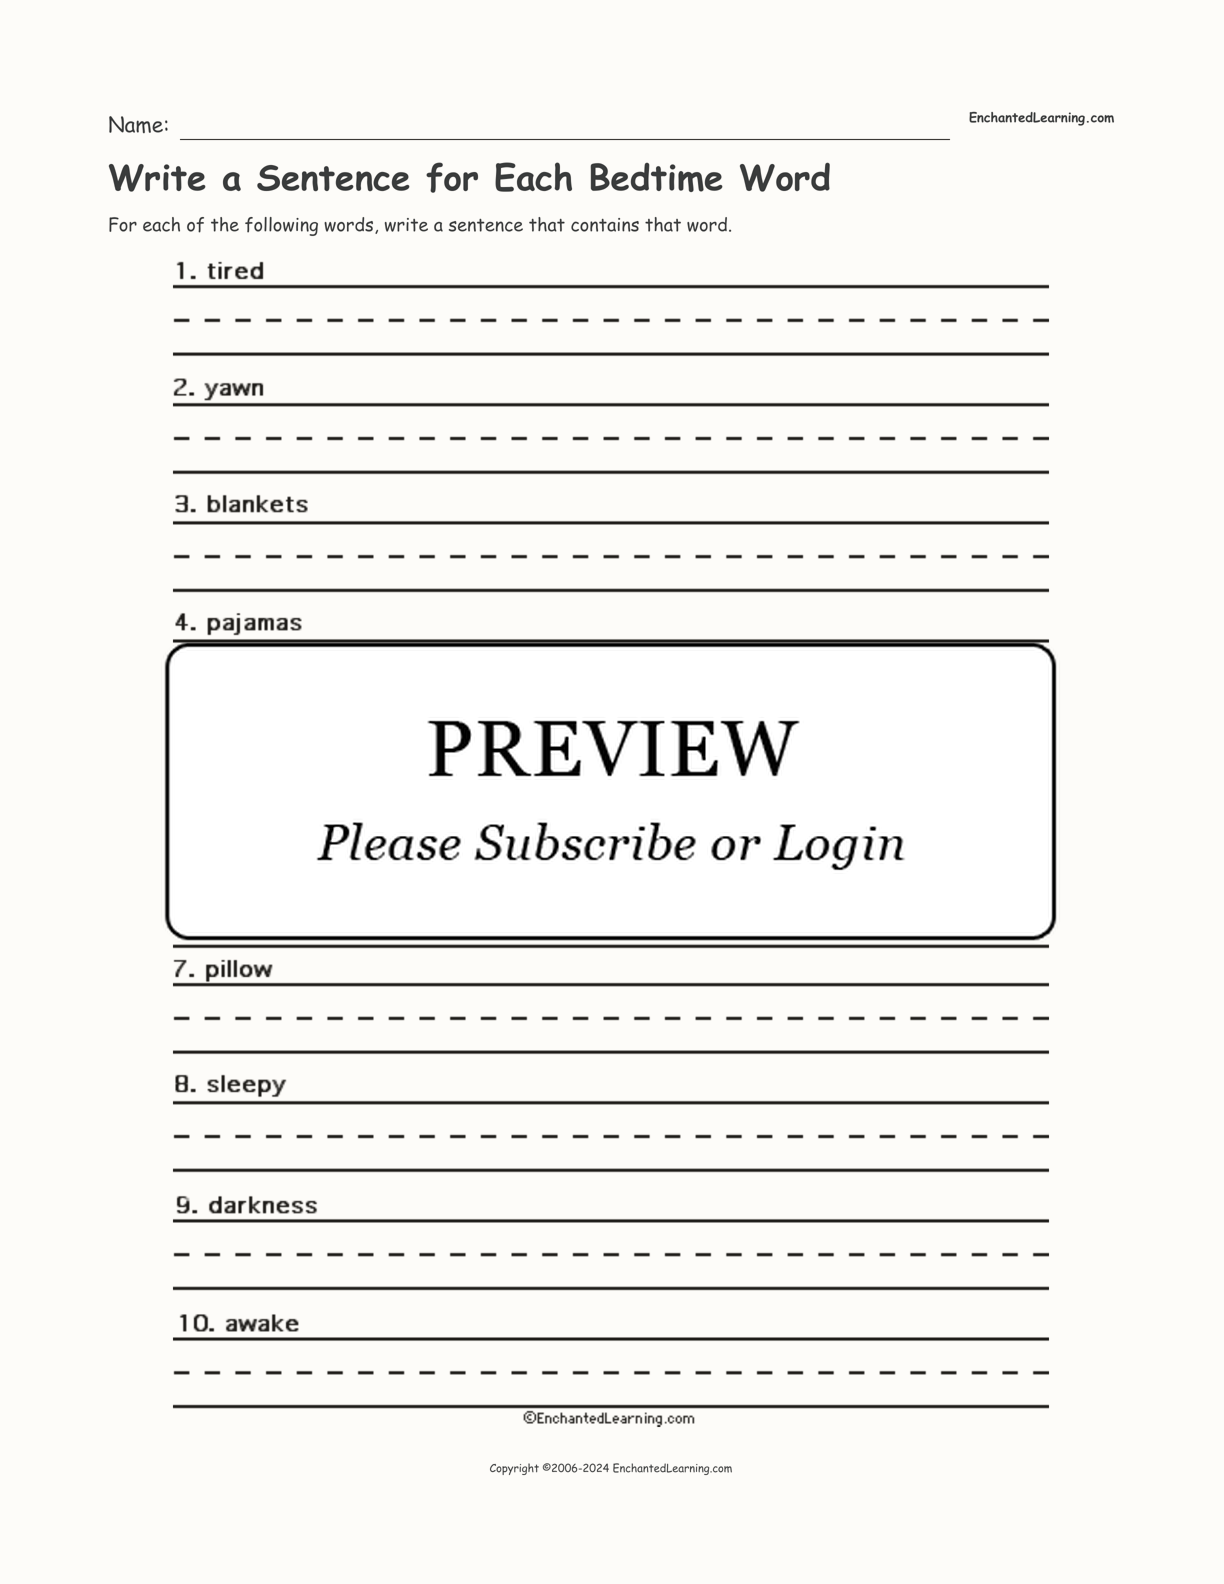 Write a Sentence for Each Bedtime Word interactive worksheet page 1